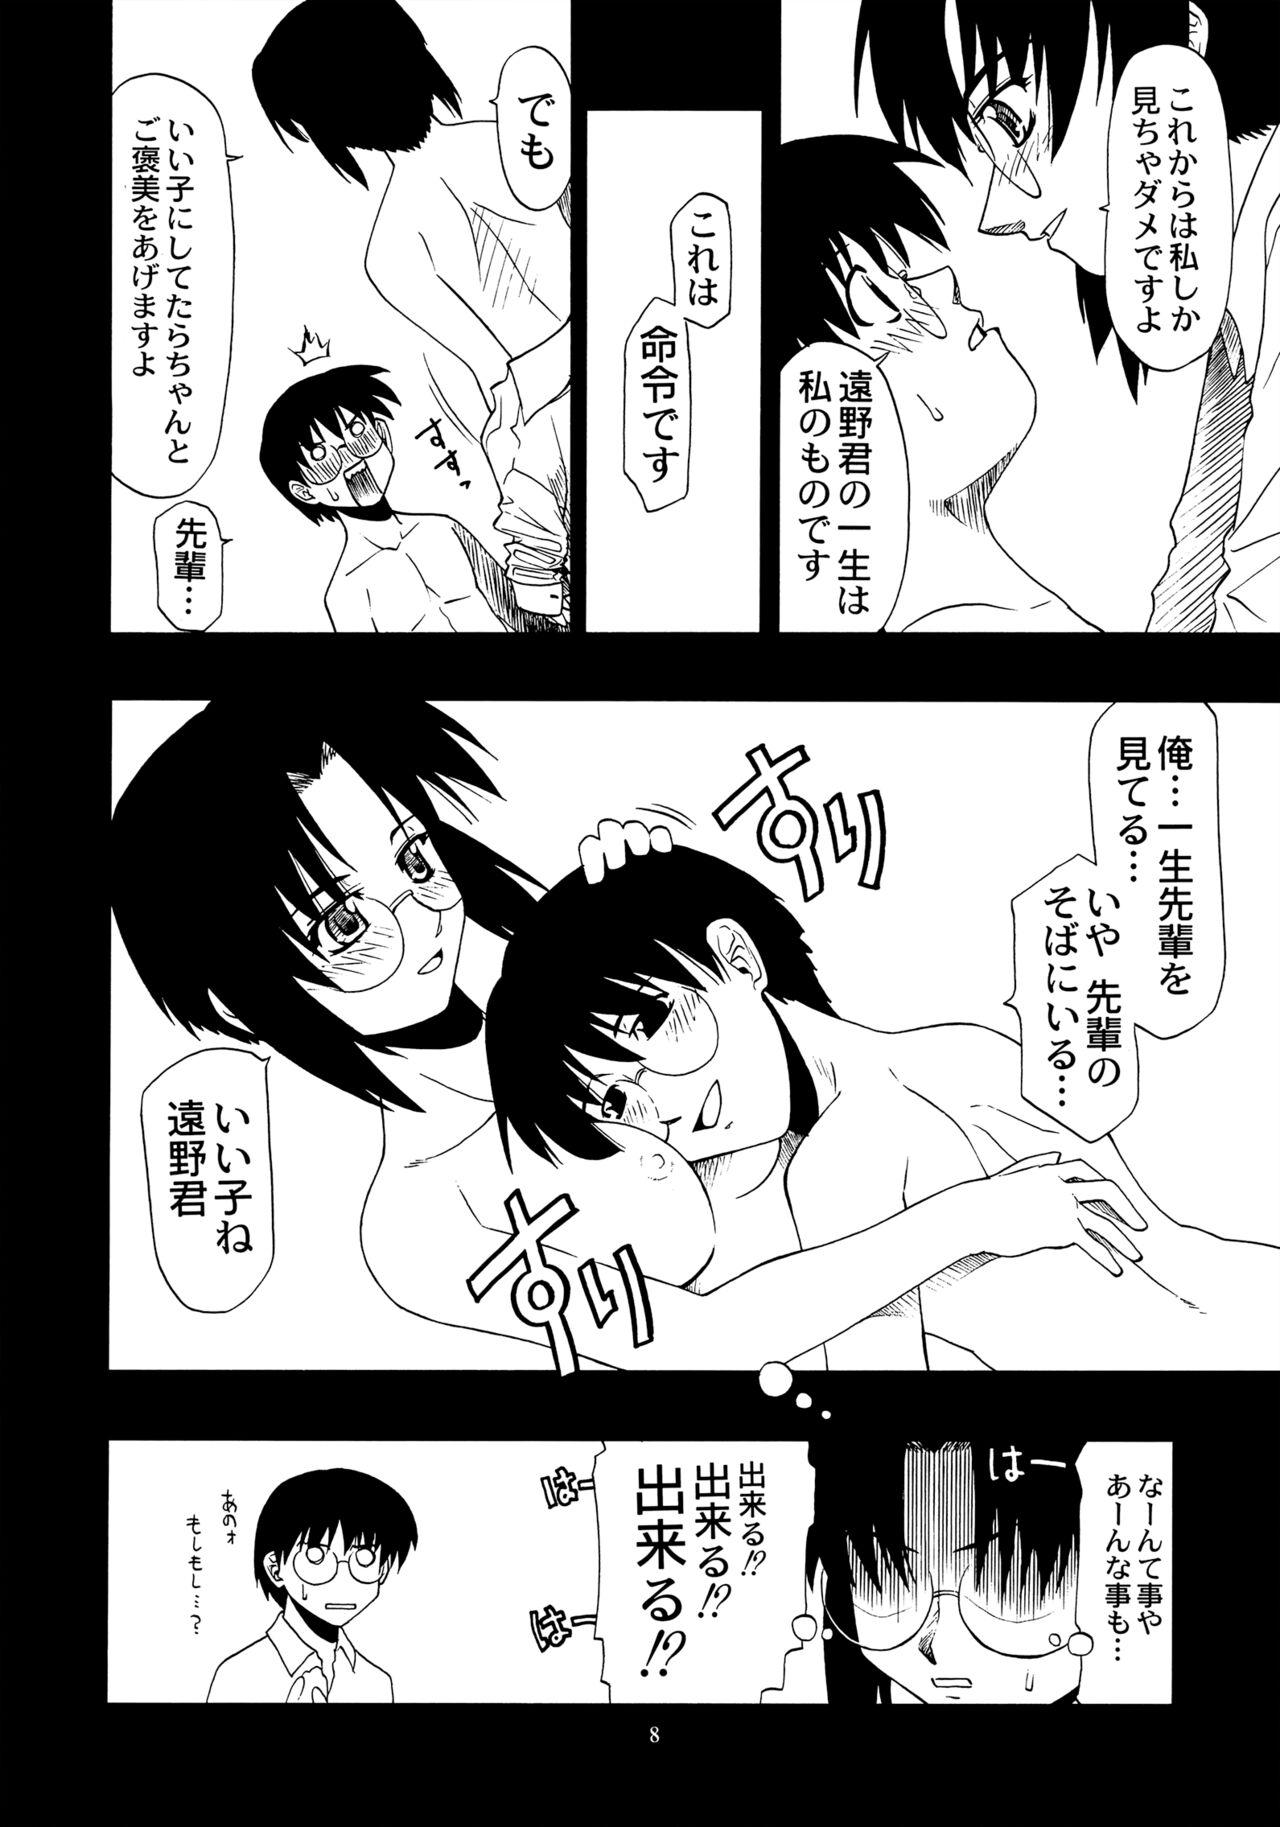 Phat Ass Curry Rice no Onna - Tsukihime Funny - Page 7